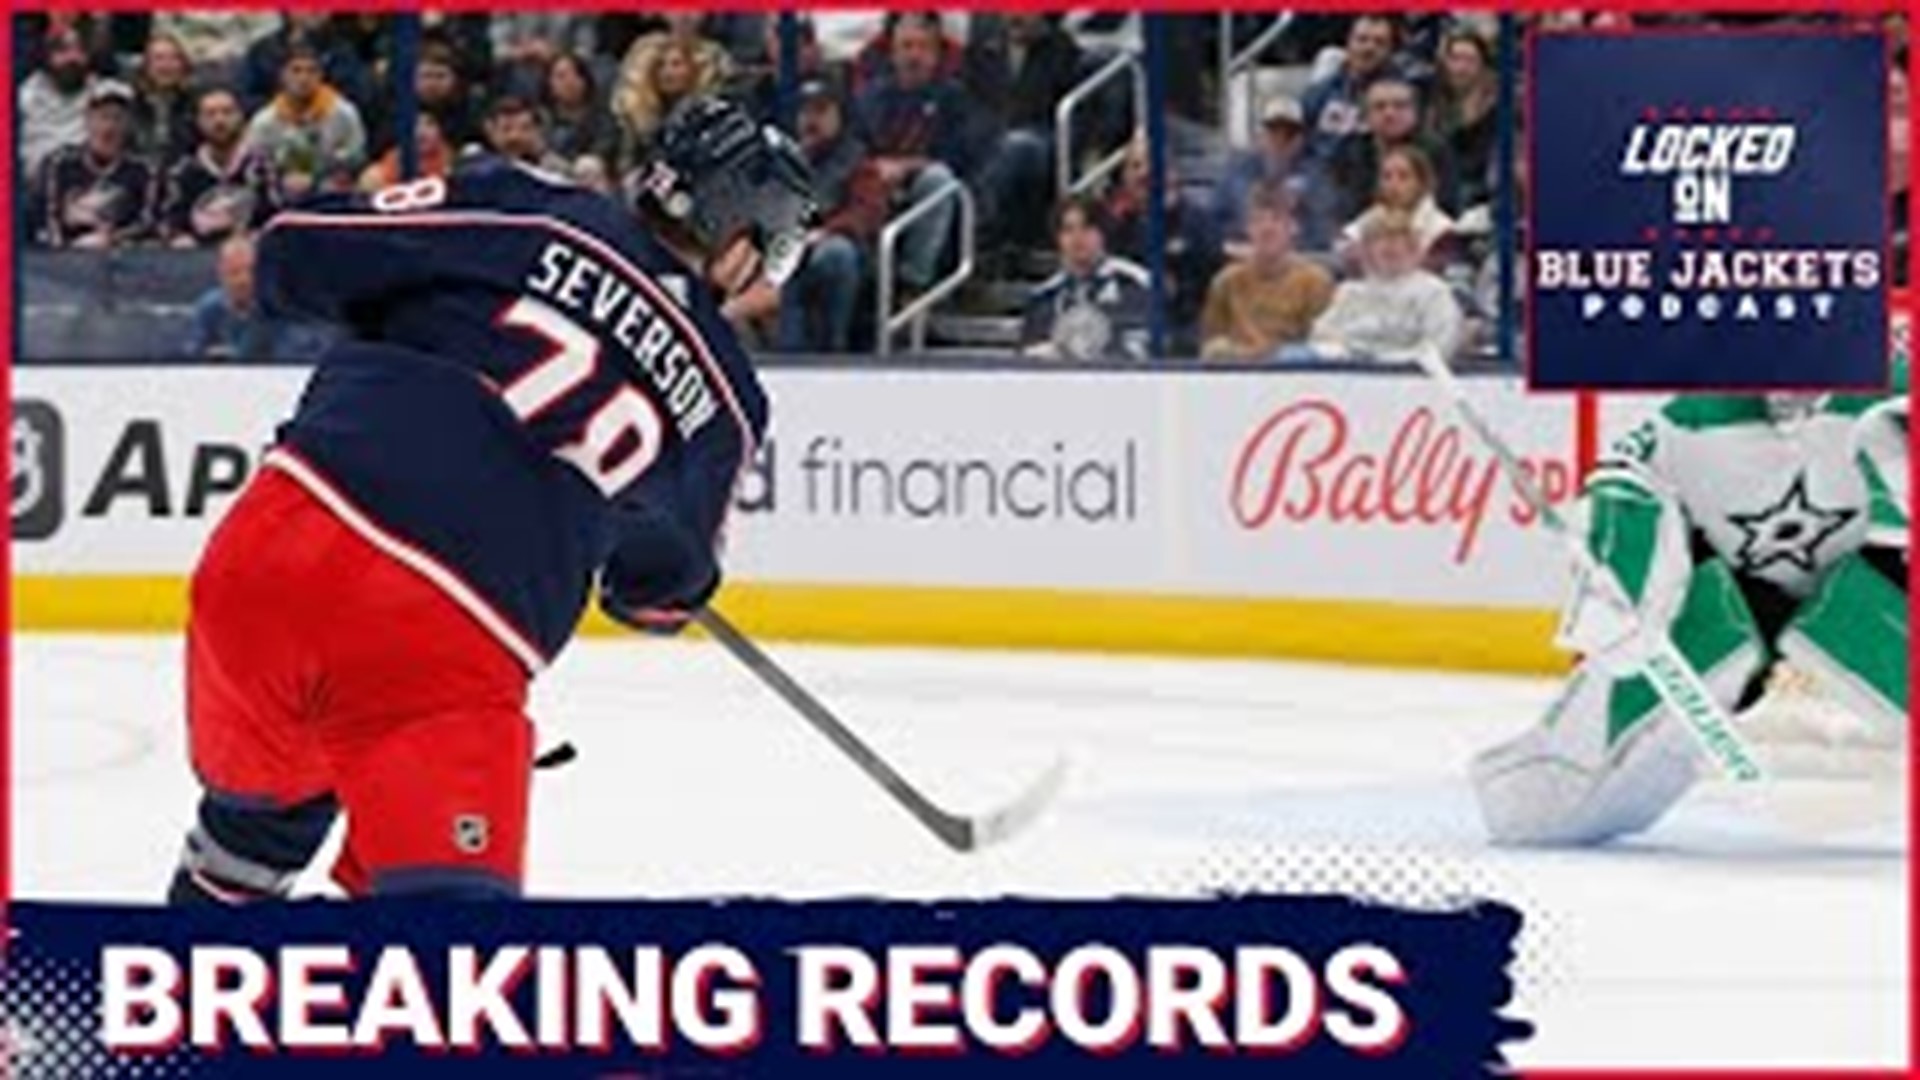 Columbus Blue Jackets Break Records And Ruin Philly's Night | 12news.com